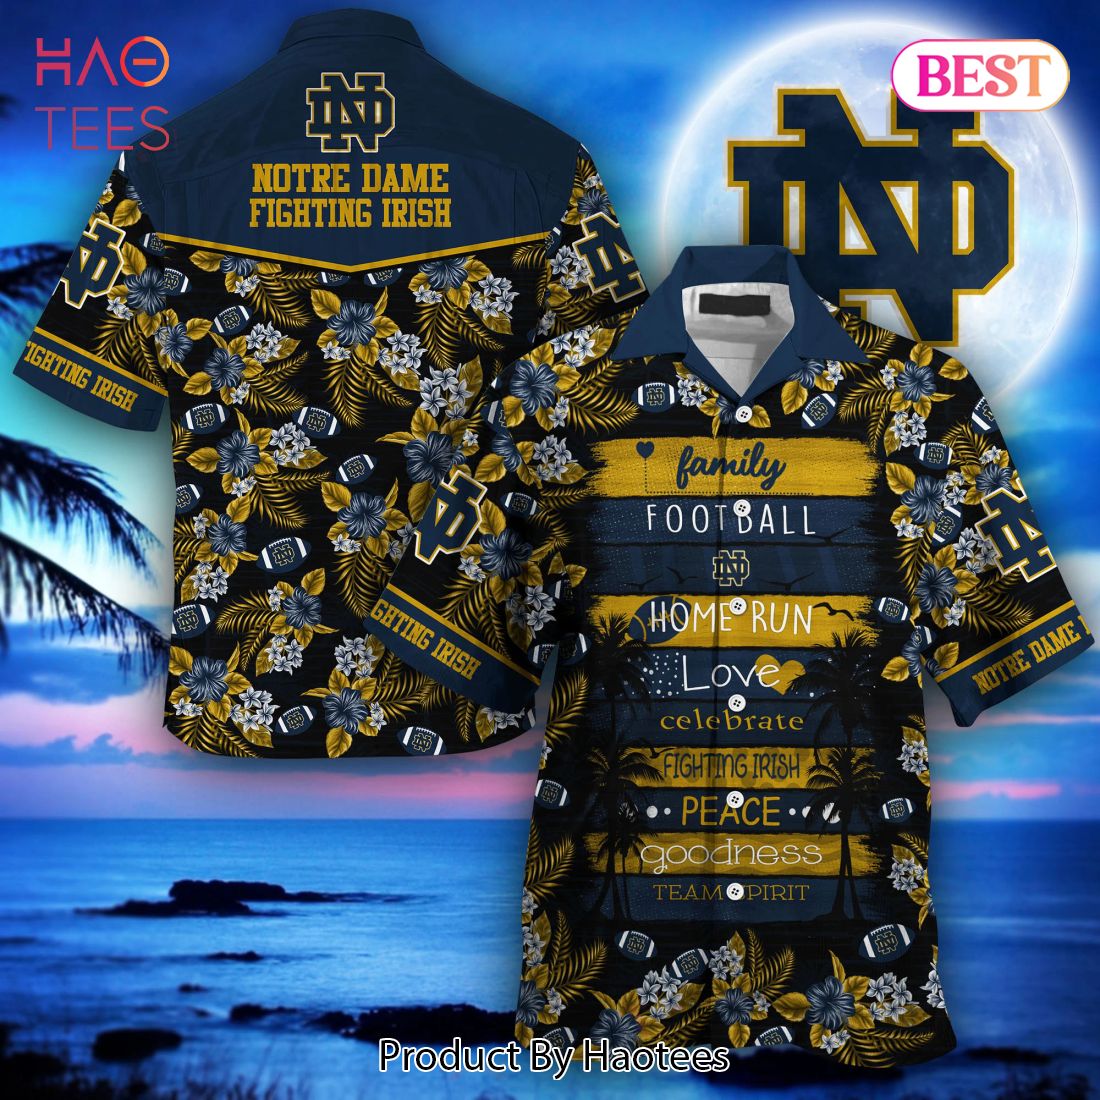 Notre Dame Jerseys, Notre Dame Fighting Irish Football Jersey and